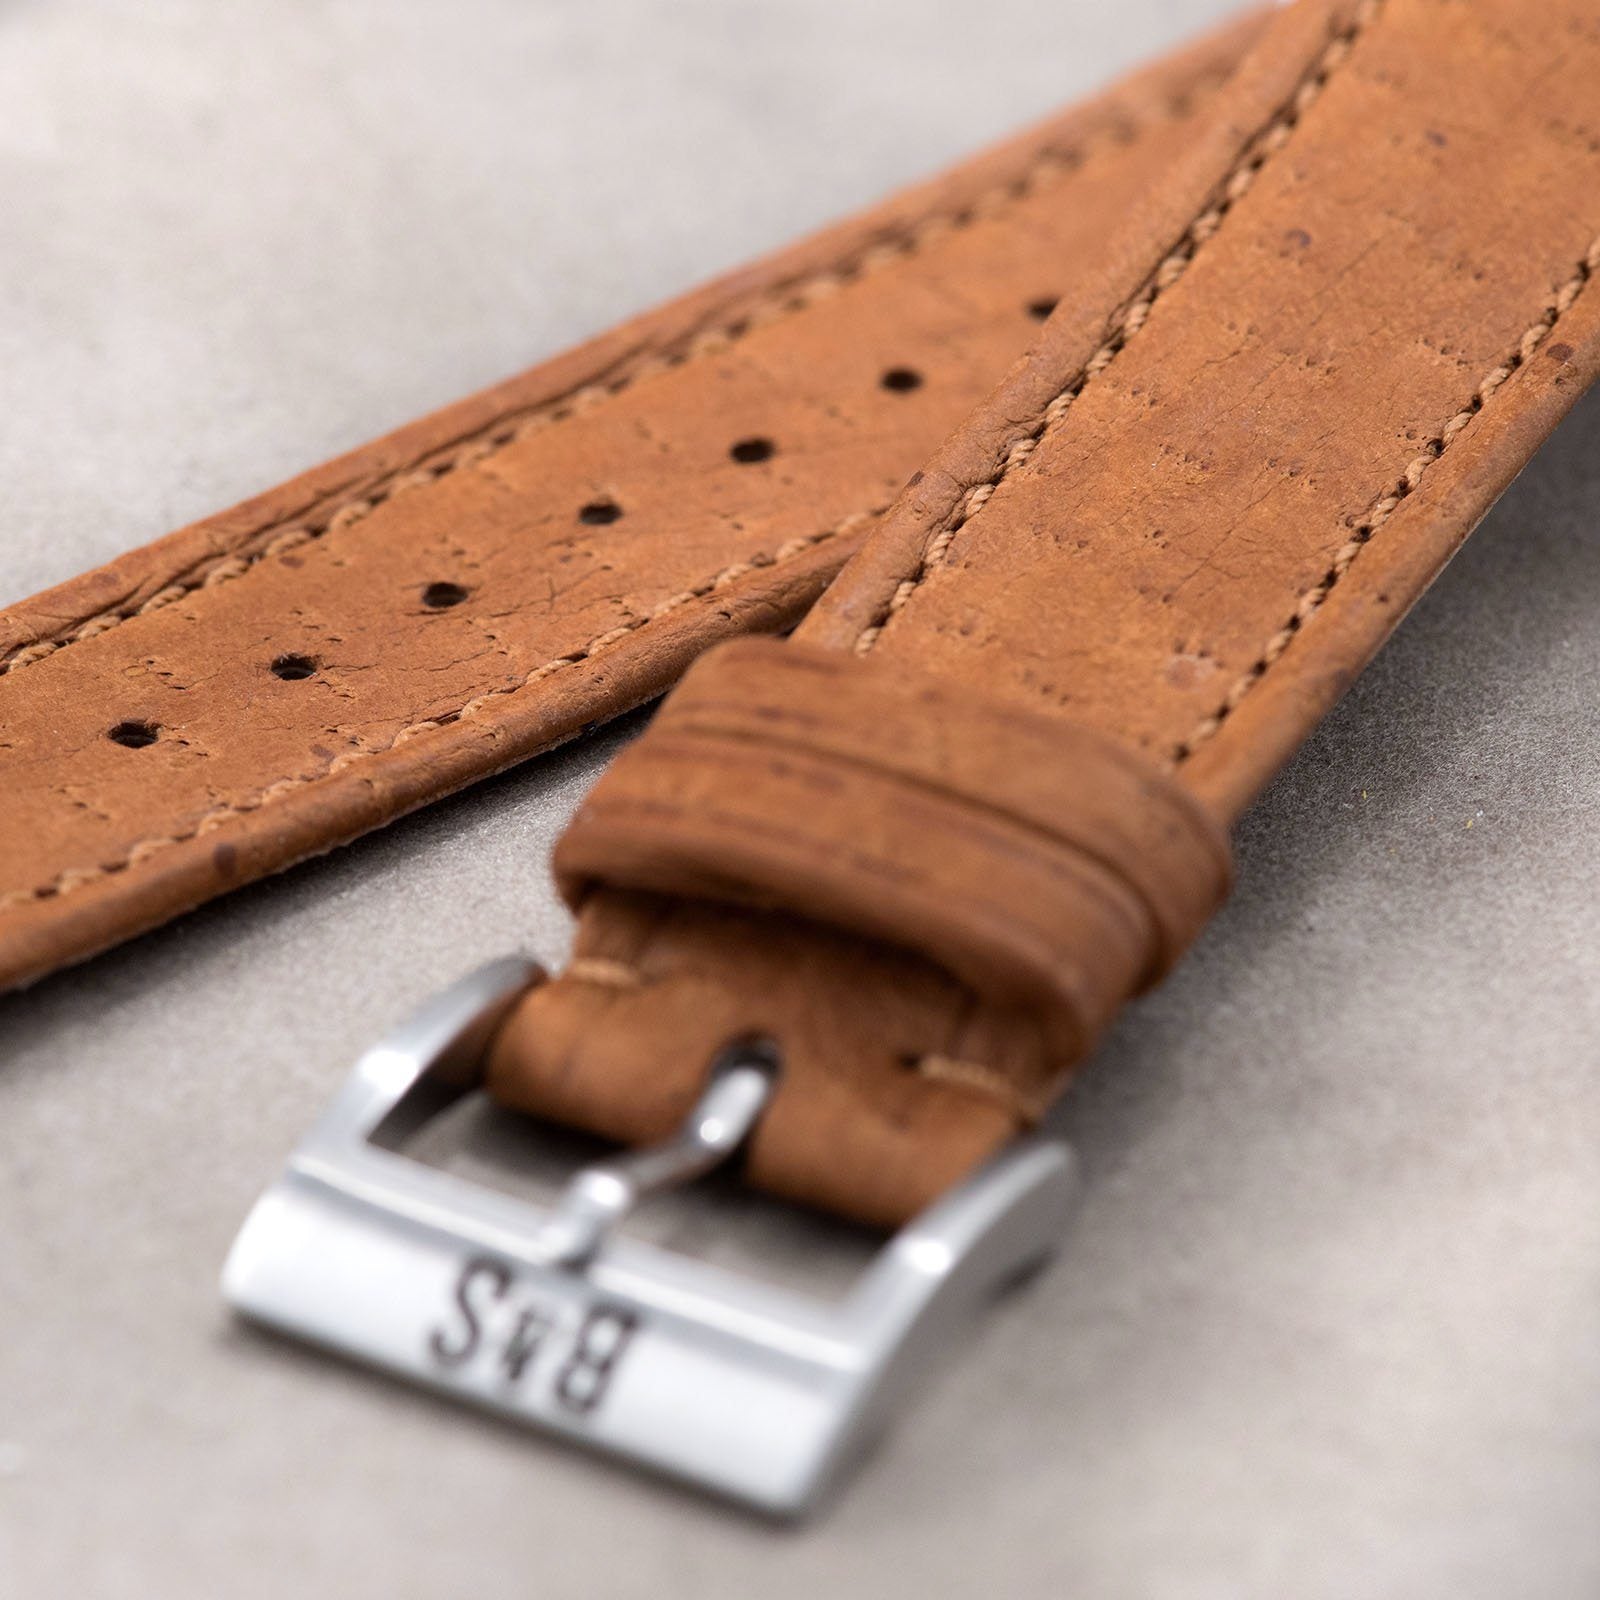 Peccary Brown Heritage Leather Strap